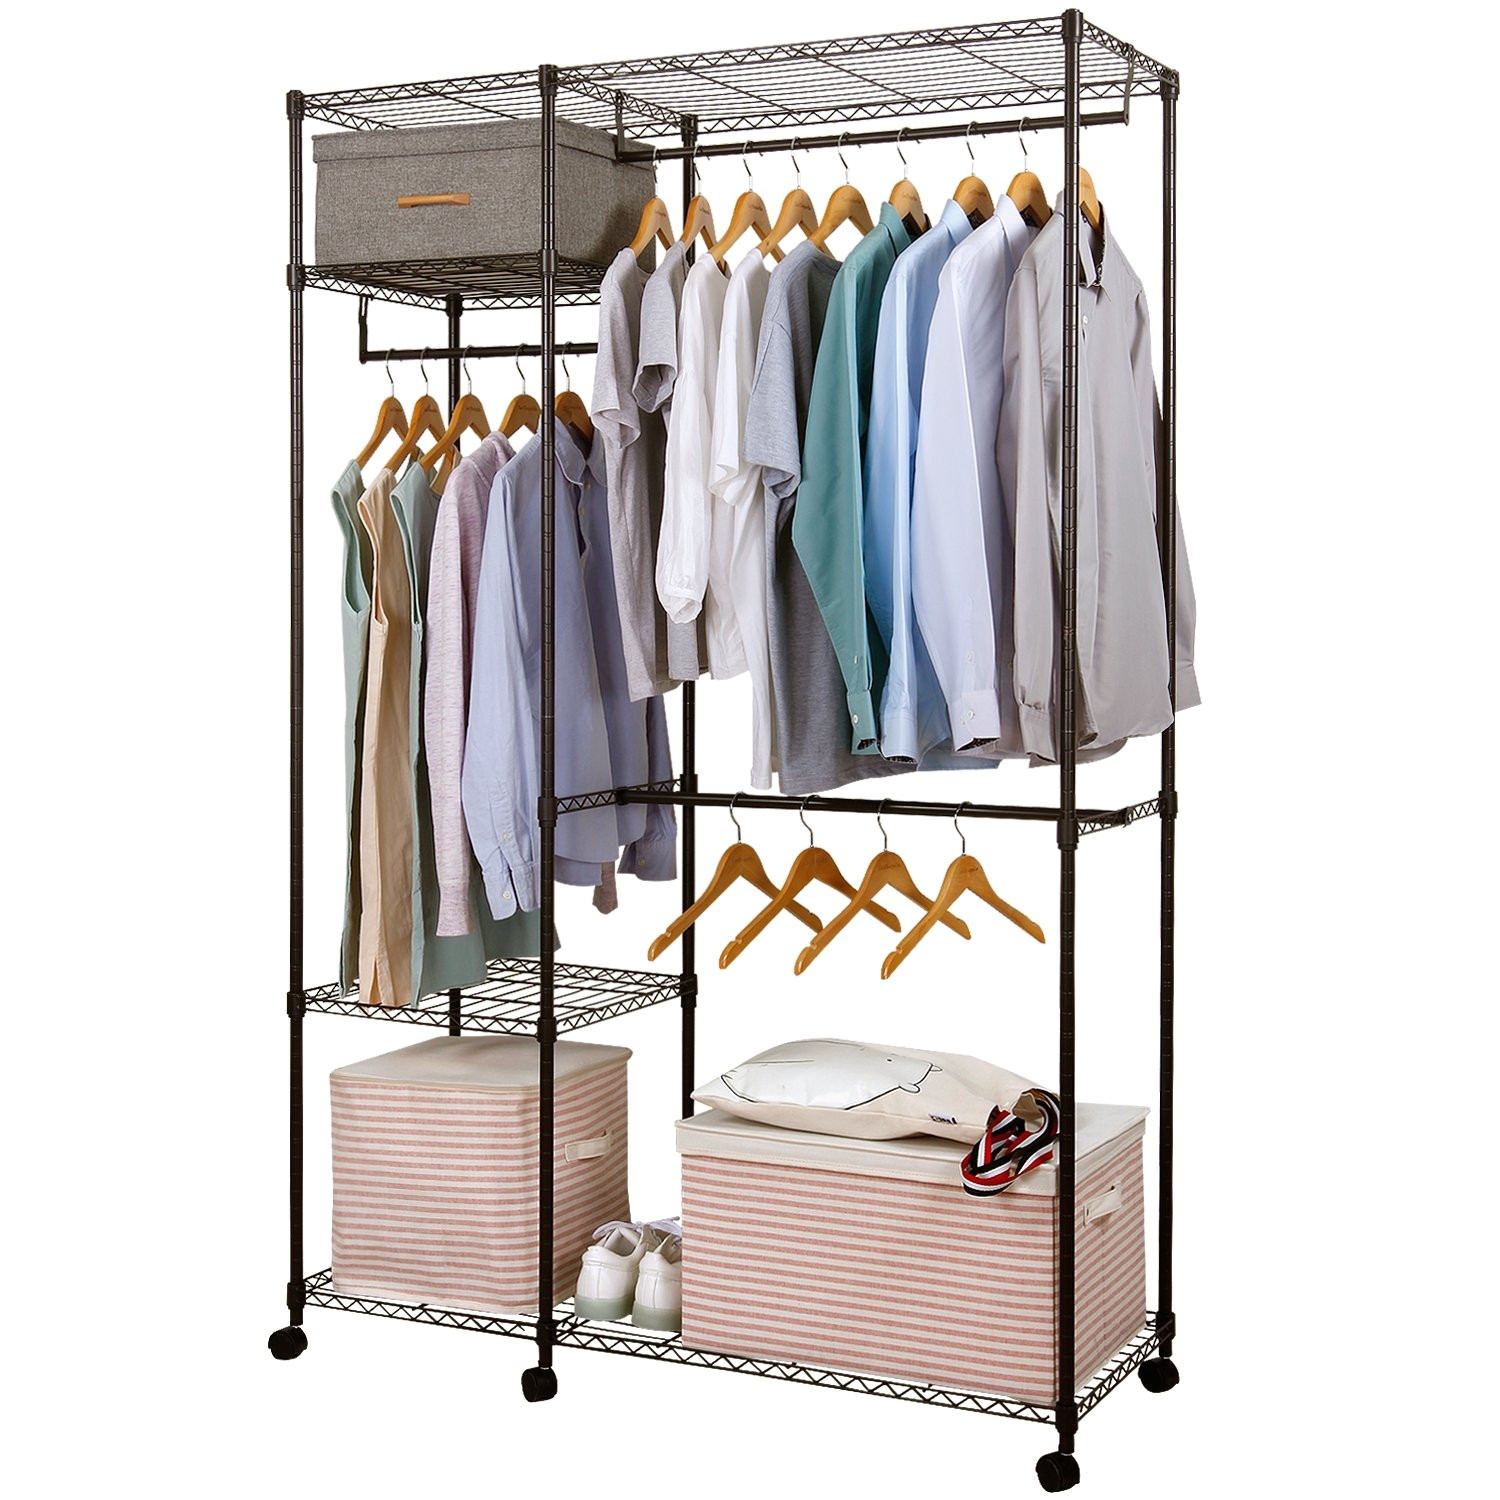 816i5wwtbsly wardrobe standing lifewit free closet garment rack heavy duty clothes rolling 603803326669 ebayi 19d